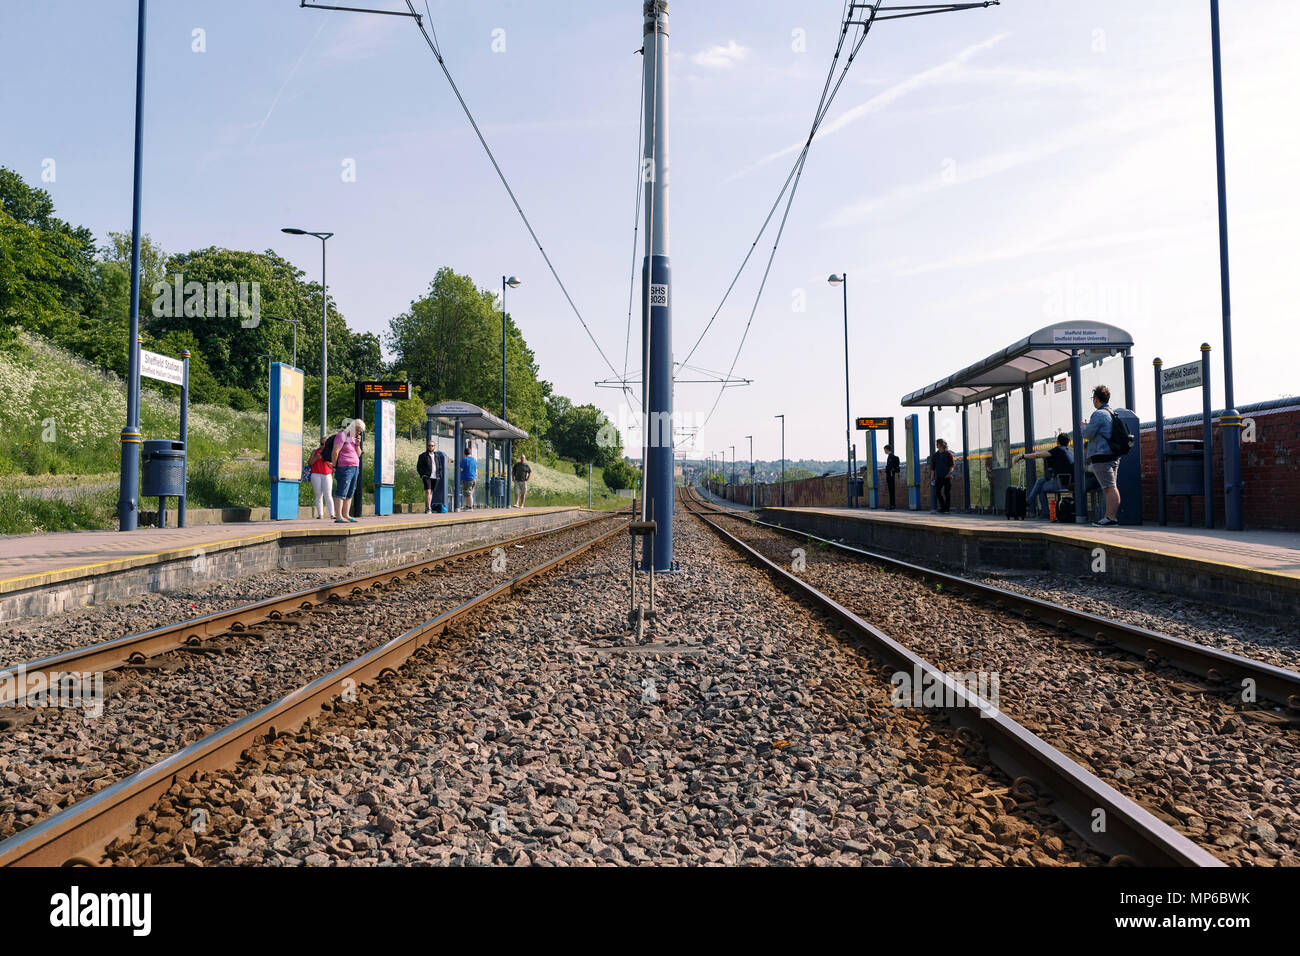 The tram stop at Sheffield railway station. People are waiting on both platforms. Stock Photo